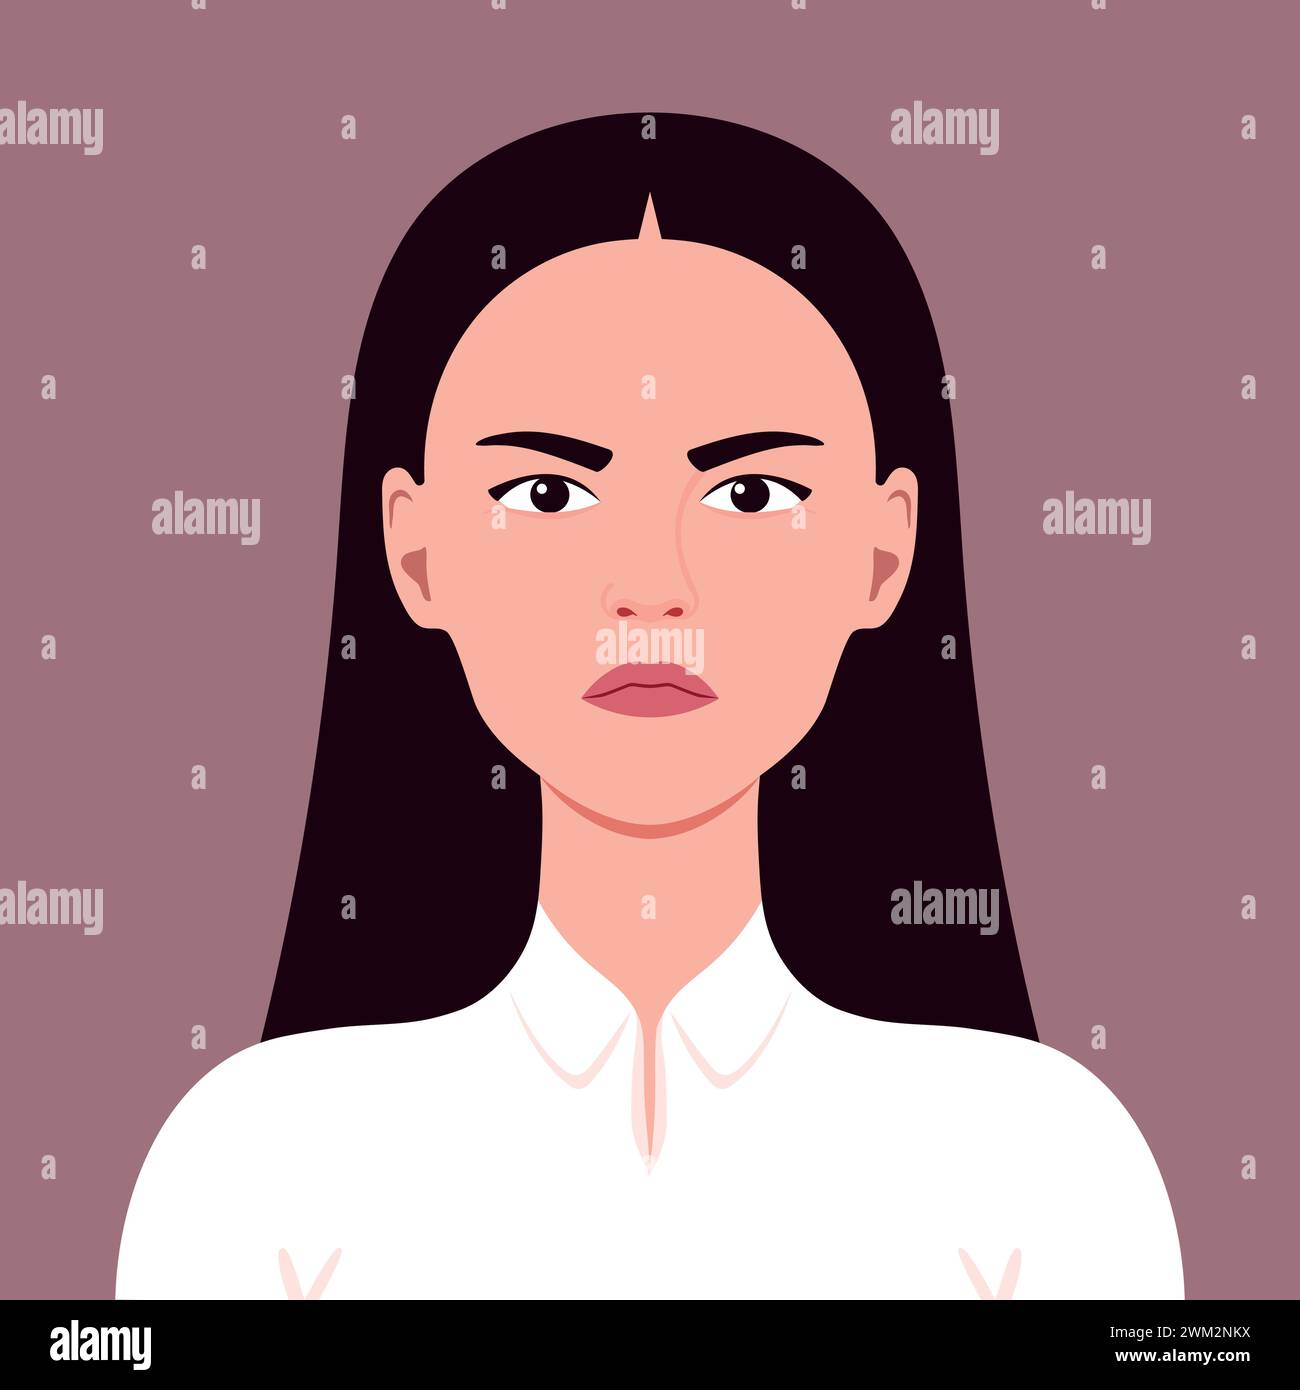 Portrait of an angry young woman. Symbolizes facial expression of an anger, gloomy and wrath. Vector illustration. Stock Vector